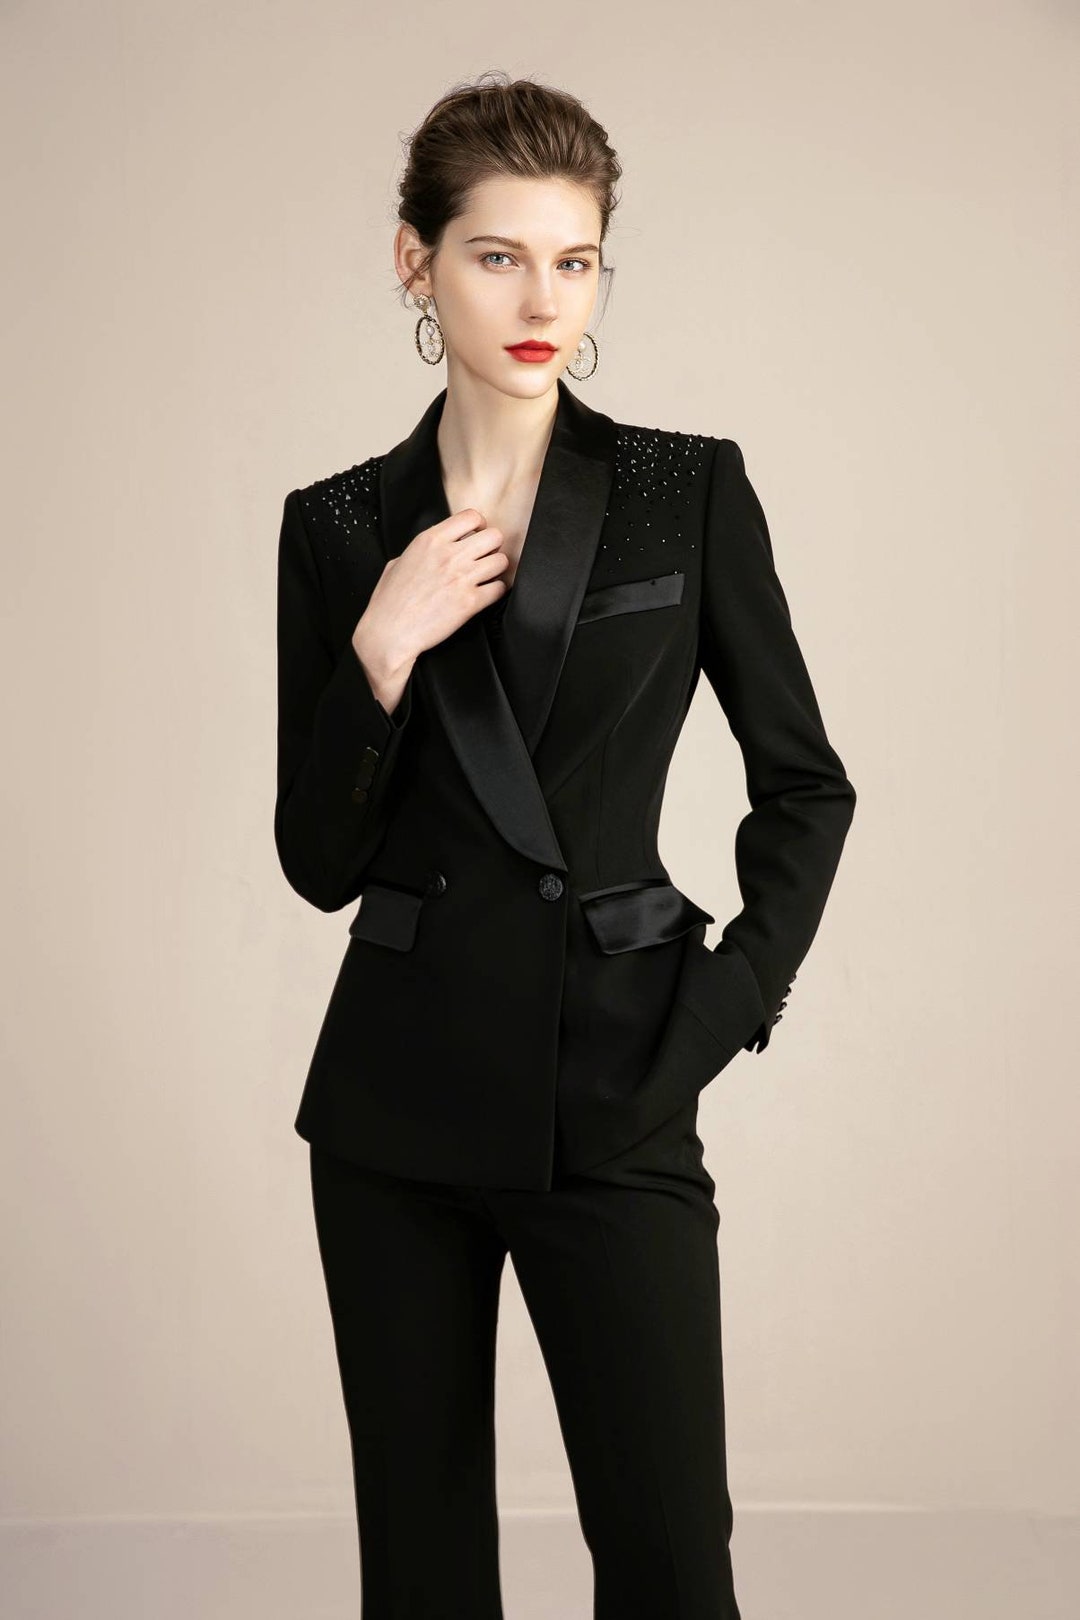 Women's Black Pant Suits gifts - up to −85%